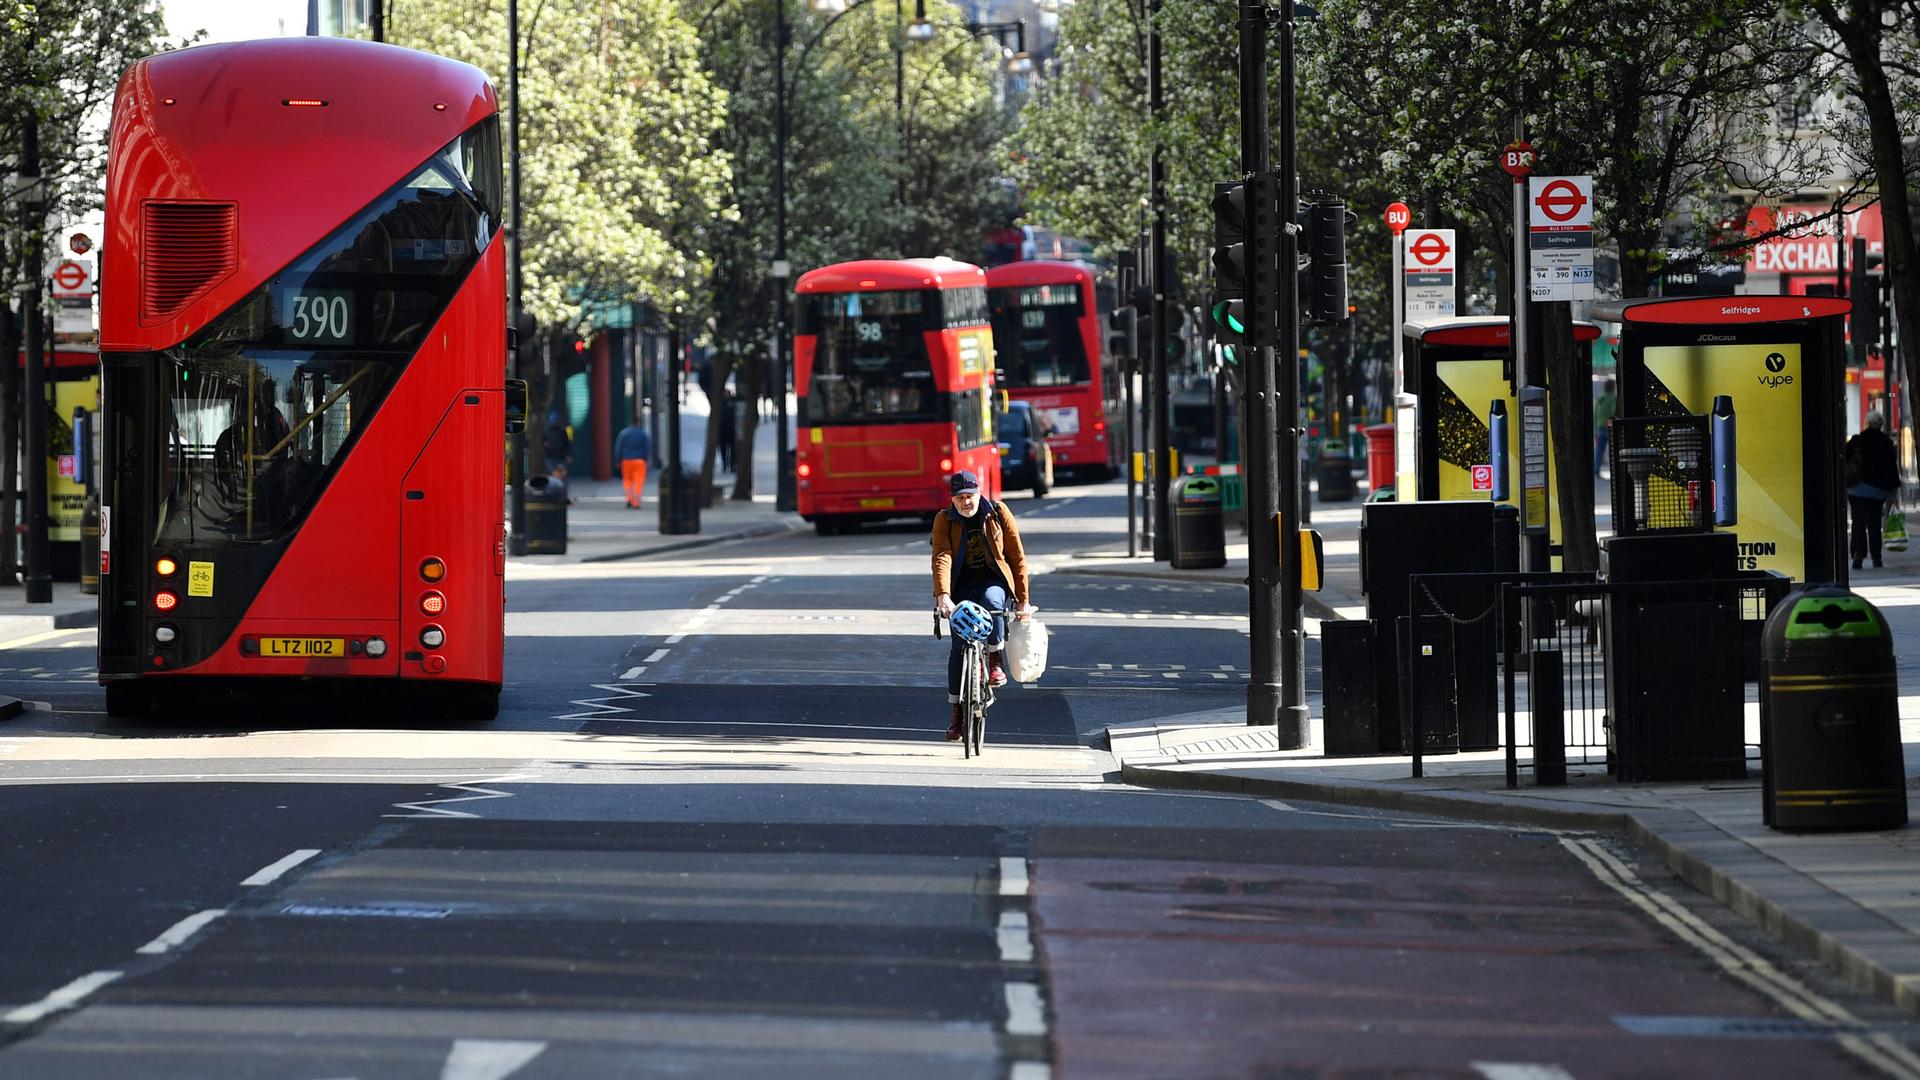 Three red, double-decker buses are shown driving on a nearly empty street that also includes a lone bicyclist.